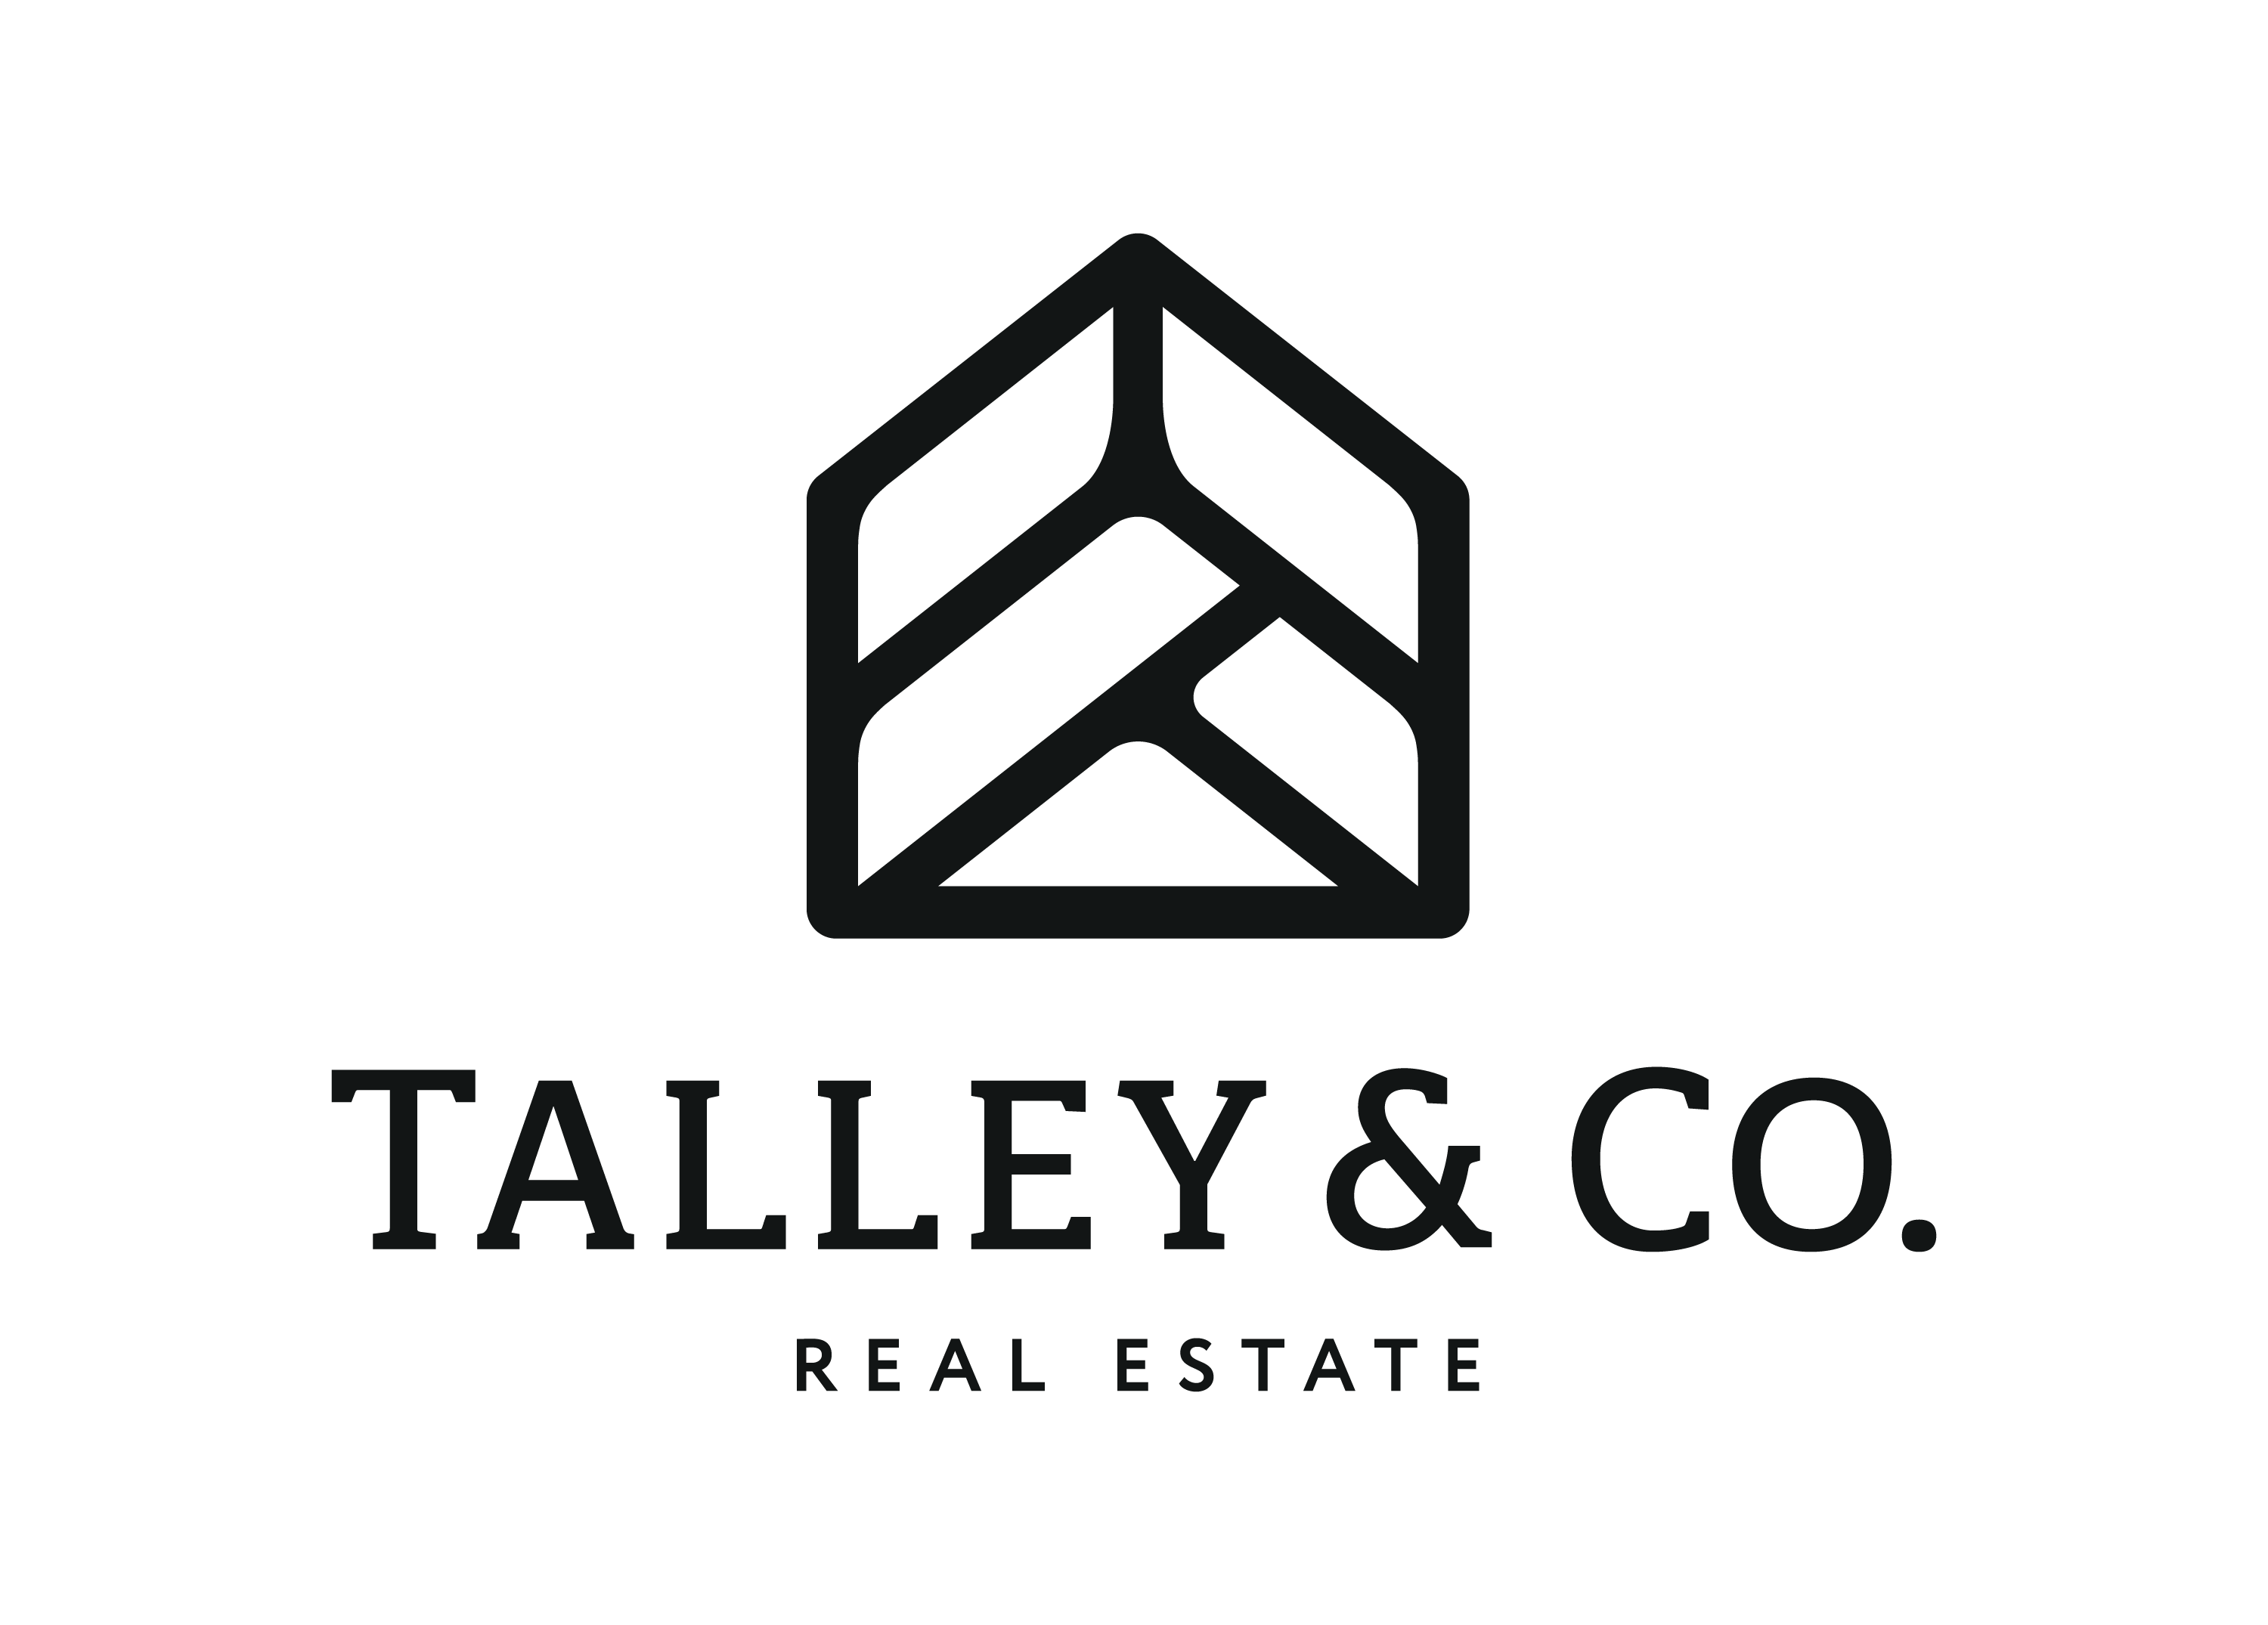 Talley & Co Real Estate